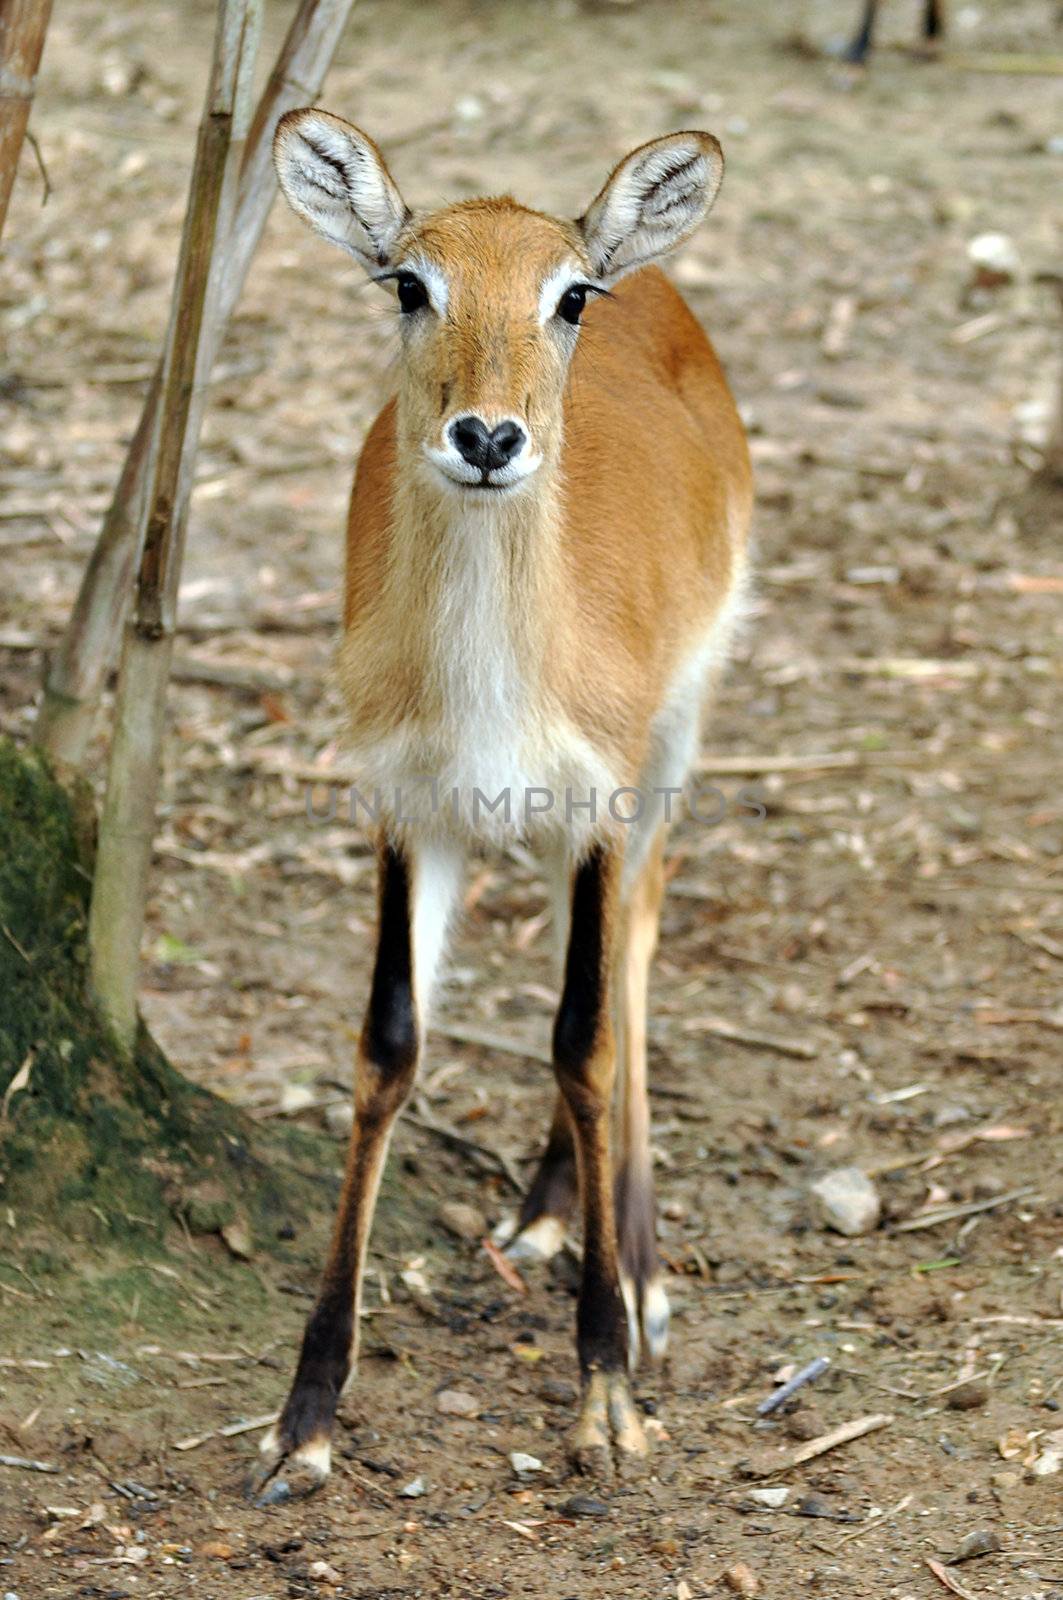 Lechwe are found in marshy areas where they eat aquatic plants. They use the knee-deep water as protection from predators.